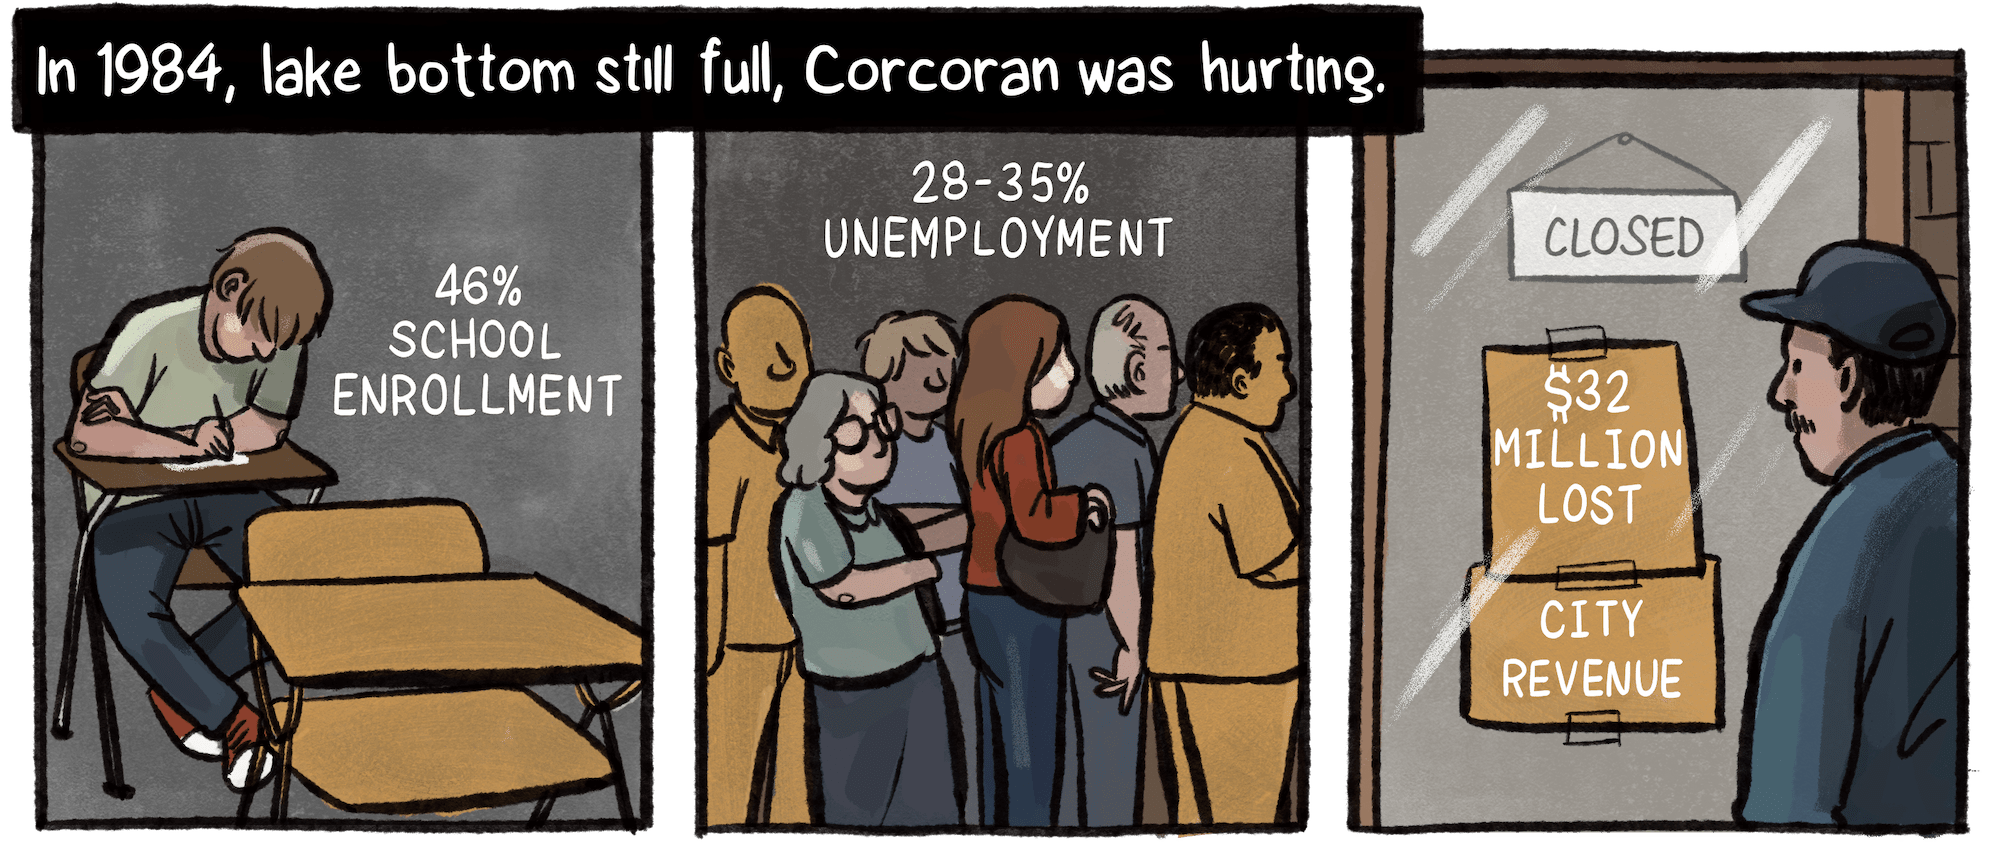 In 1984, lake bottom still full, Corcoran was hurting. A series of images depicts economic conditions, including 46% school enrollment and a boy sitting at a desk; a 28-35% unemployment rate and a line of workers; and a man reading a sign taped to a door that reads “$32 million in lost city revenue."